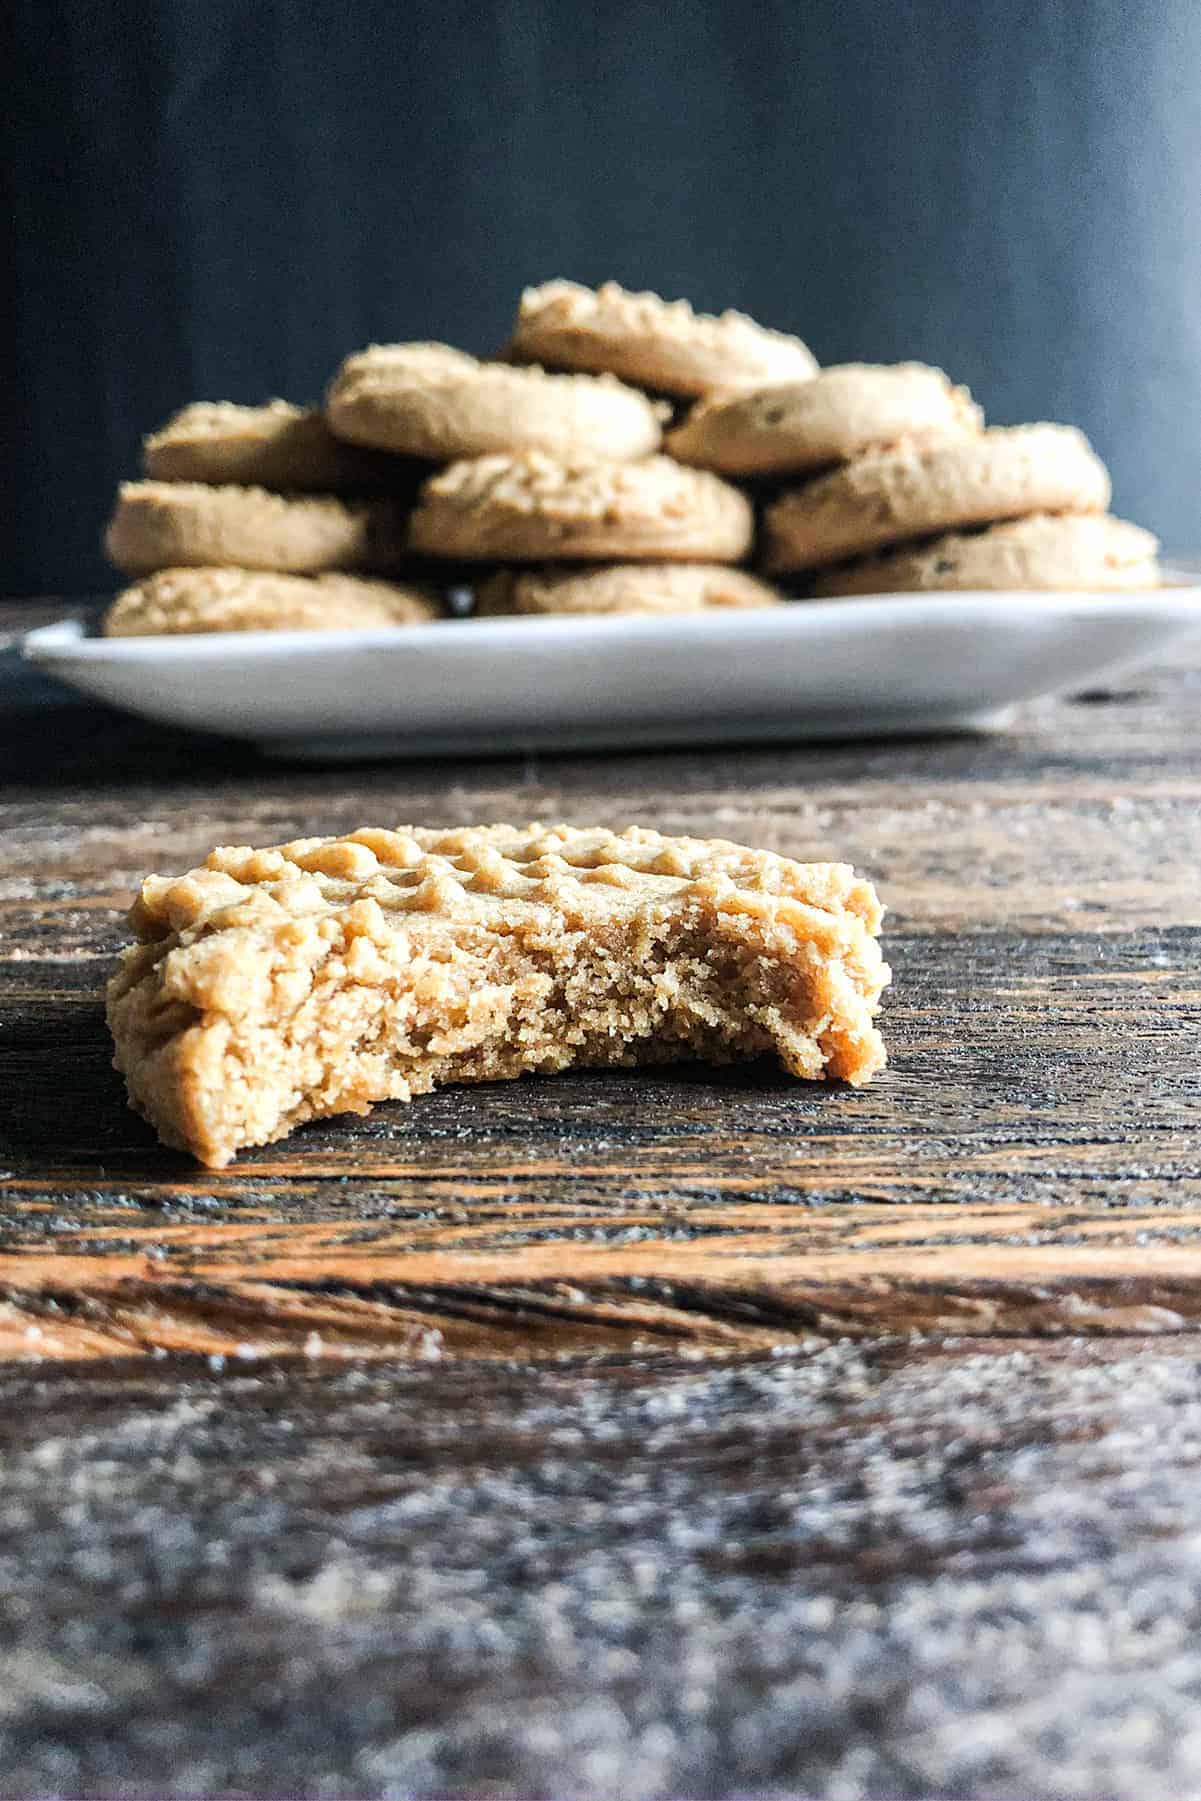 Peanut butter cookie with a bite out of it